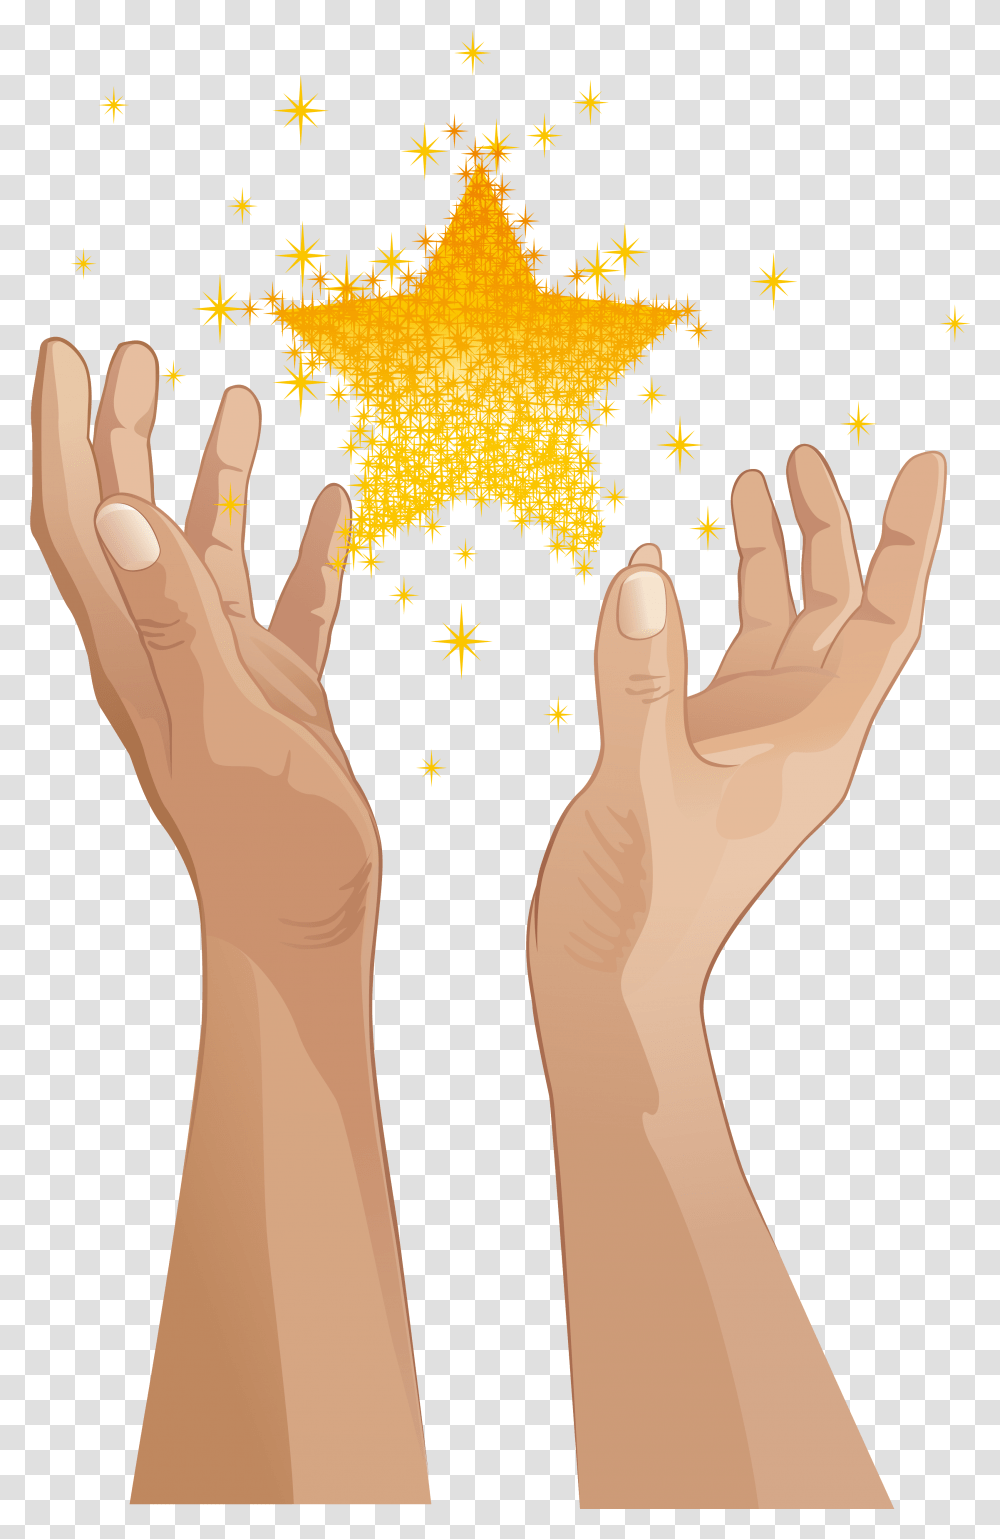 Reaching Hand Star In Hand Vector Full Size Hand Reaching For The Stars, Symbol, Star Symbol, Wand Transparent Png